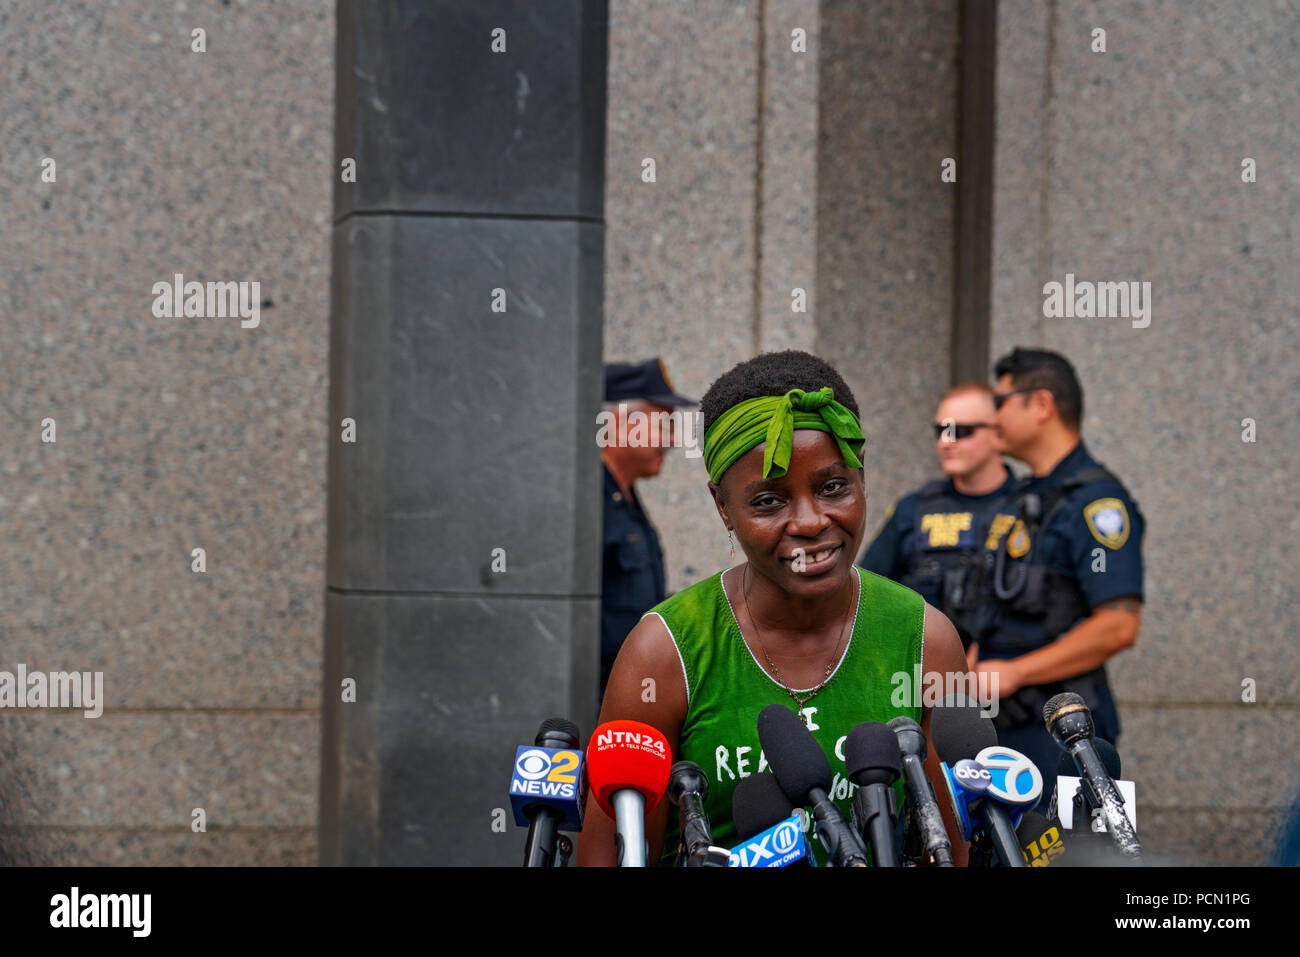 New York, New York, U.S., 3 August 2018  Immigration activist Therese Patricia Okoumou speaks outside federal court in Manhattan after hearing on trespassing & disorderly conduct charges.  Okoumou, a native of Congo, scaled the base of the Statue of Liberty on July 4, 2018, to protest against Trump administration immigration policies.  Okoumou wore a green dress to court bearing the words “I really care why won’t u?” – a response to first lady Melania Trump, who wore a jacket with the words “I really don’t care, do u?” when she visited a facility for migrant children in June. Stock Photo